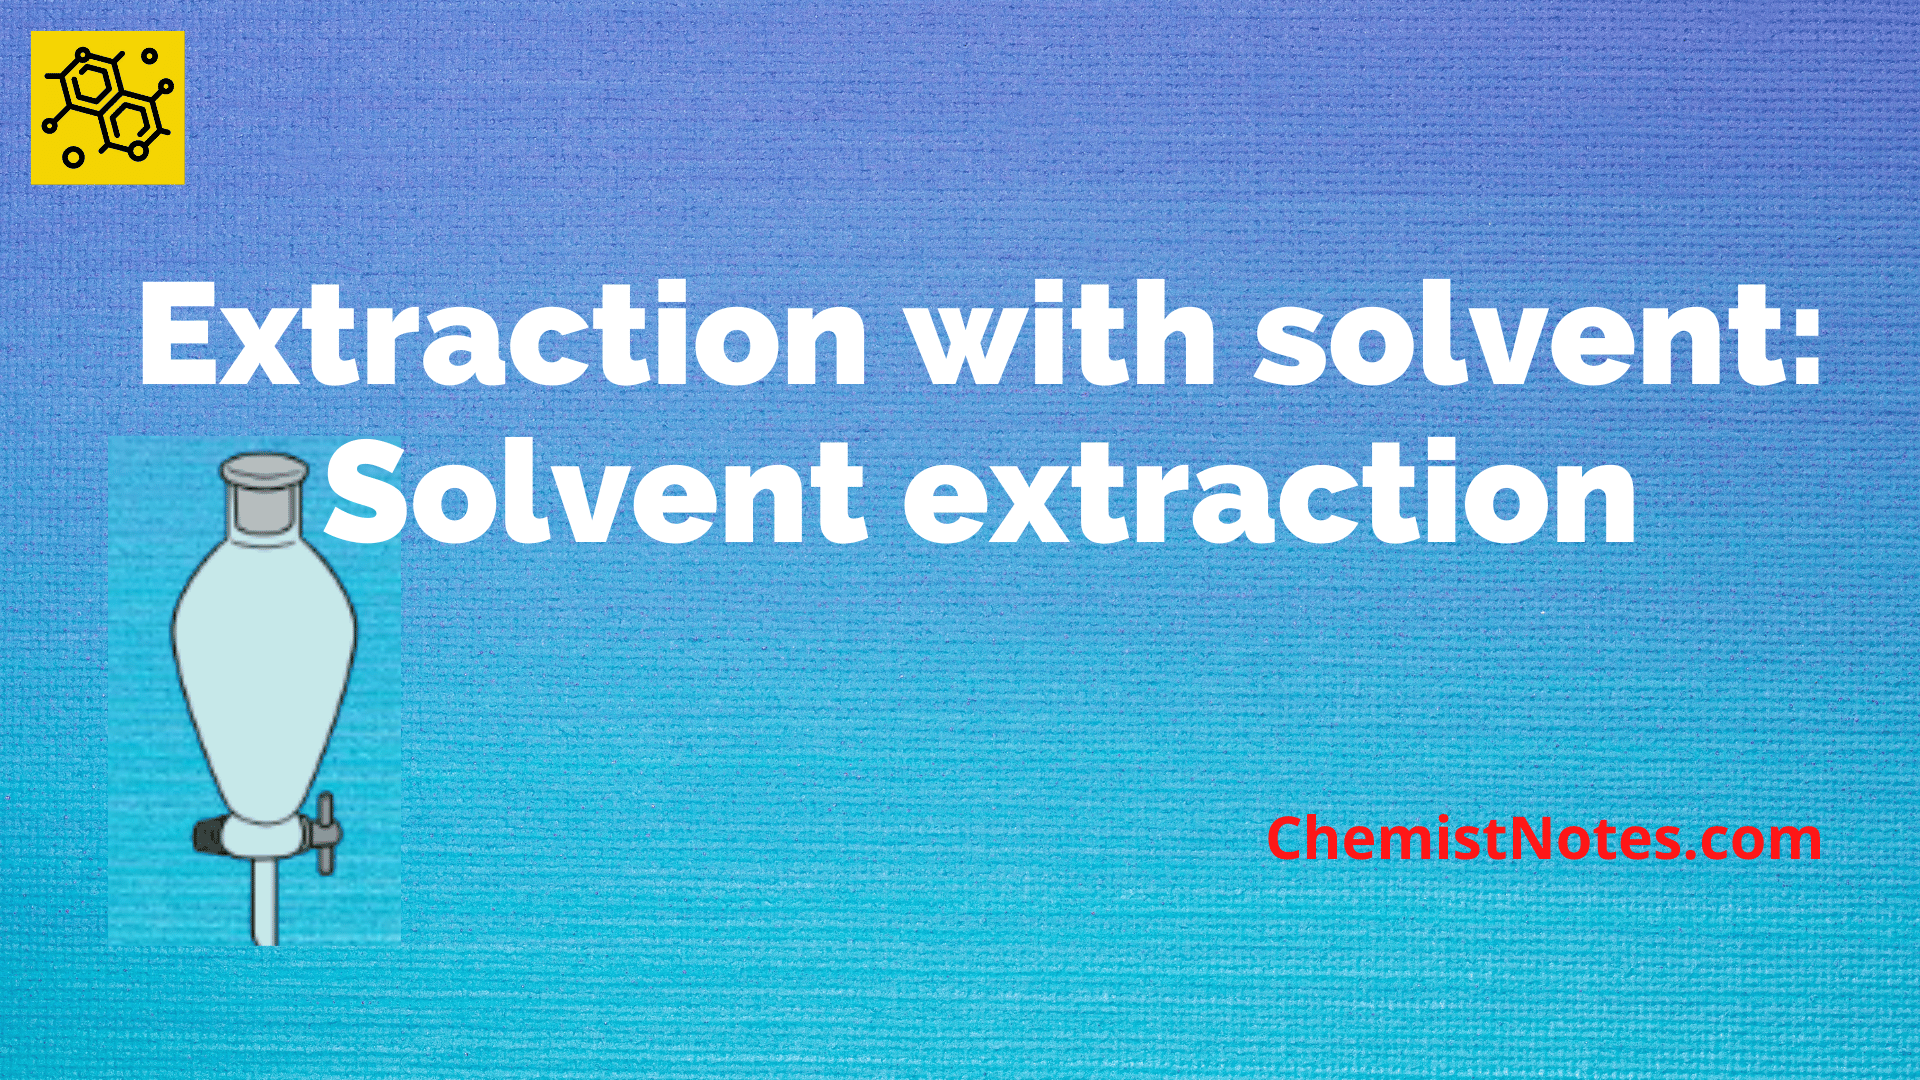 solvent-extraction-principle-easy-process-application-chemistry-notes